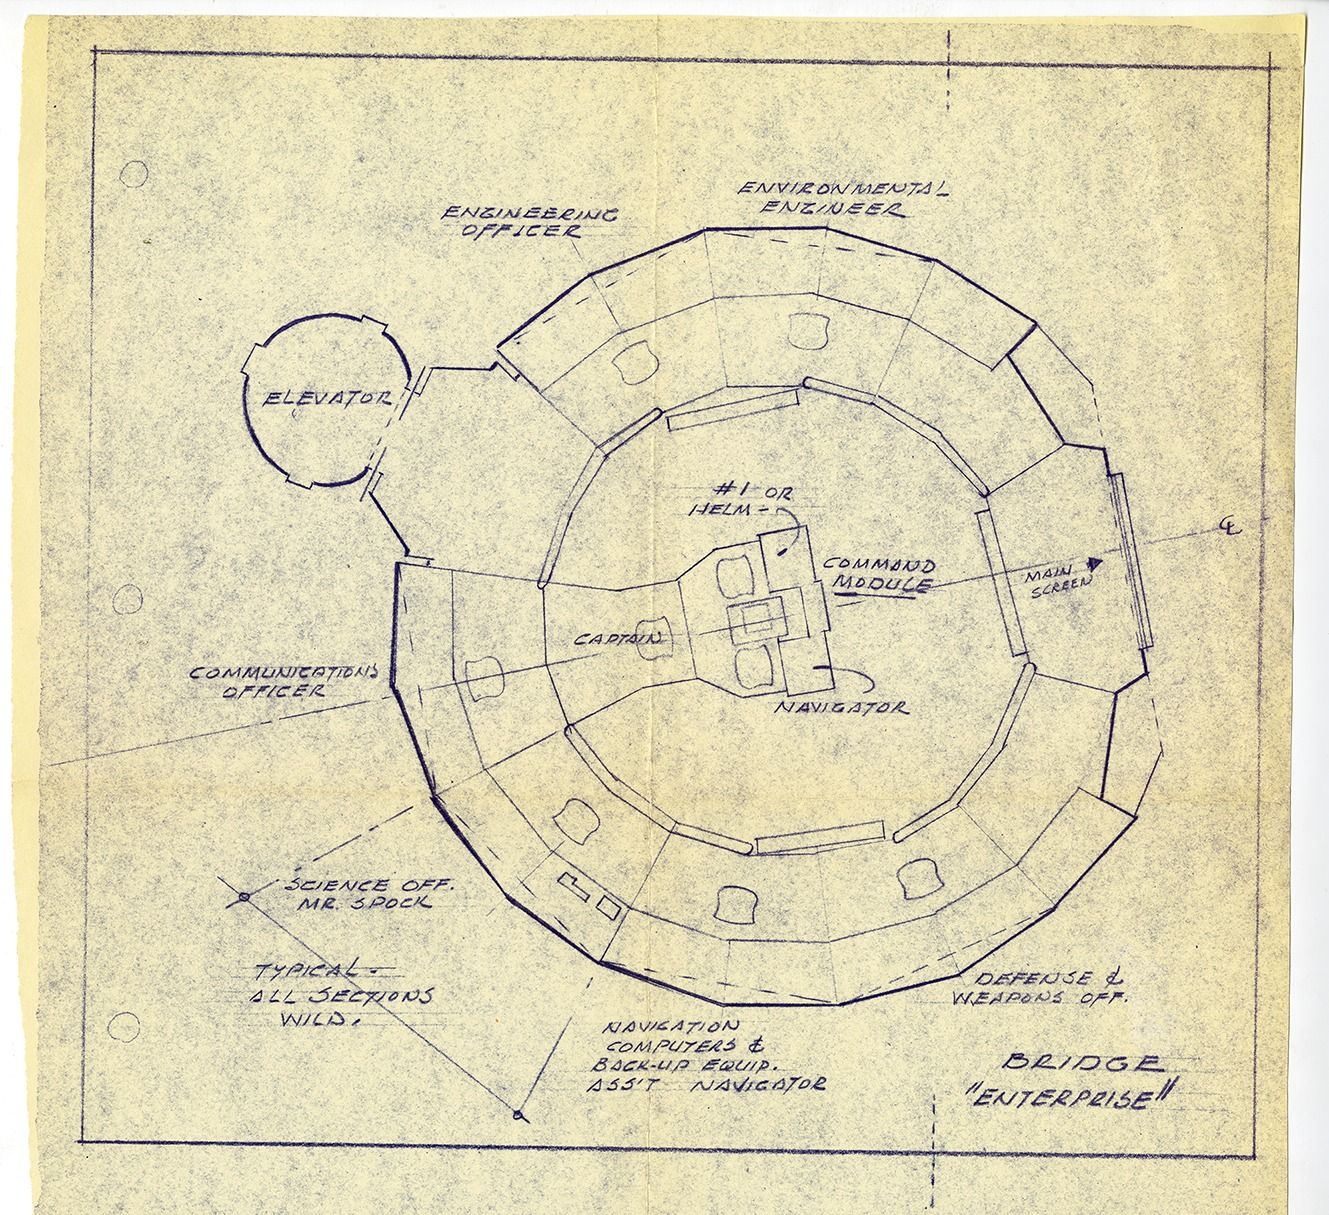 A blueprint of the USS enterprise on yellowed paper